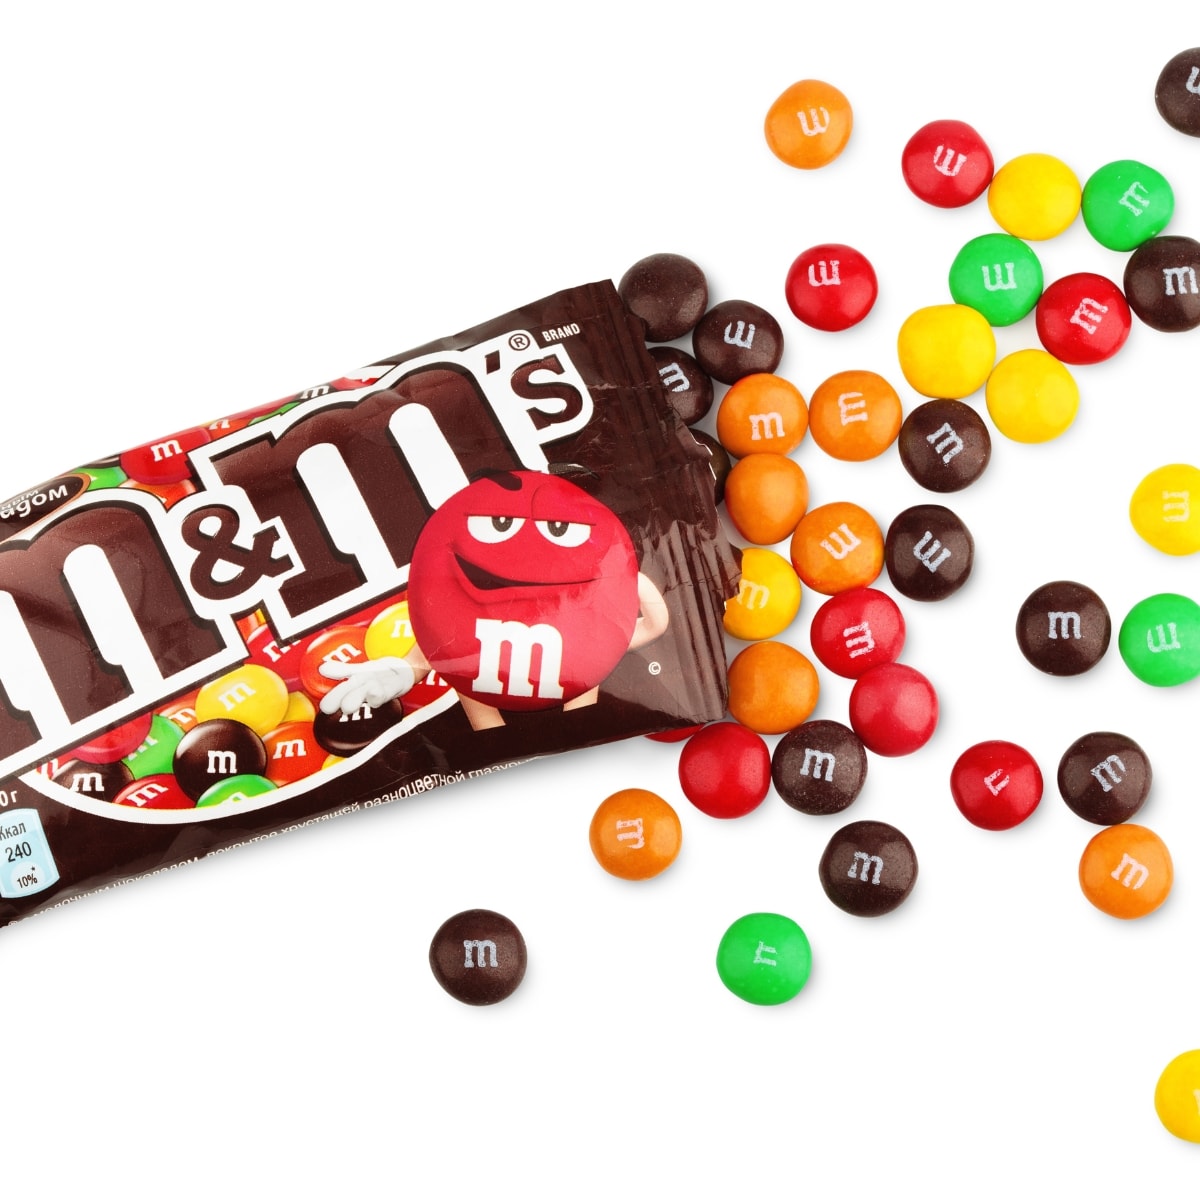 20 Popular M&M Flavors To Try featuring Regular M&M's Chocolate Candies Spilling Out of Brown Packet